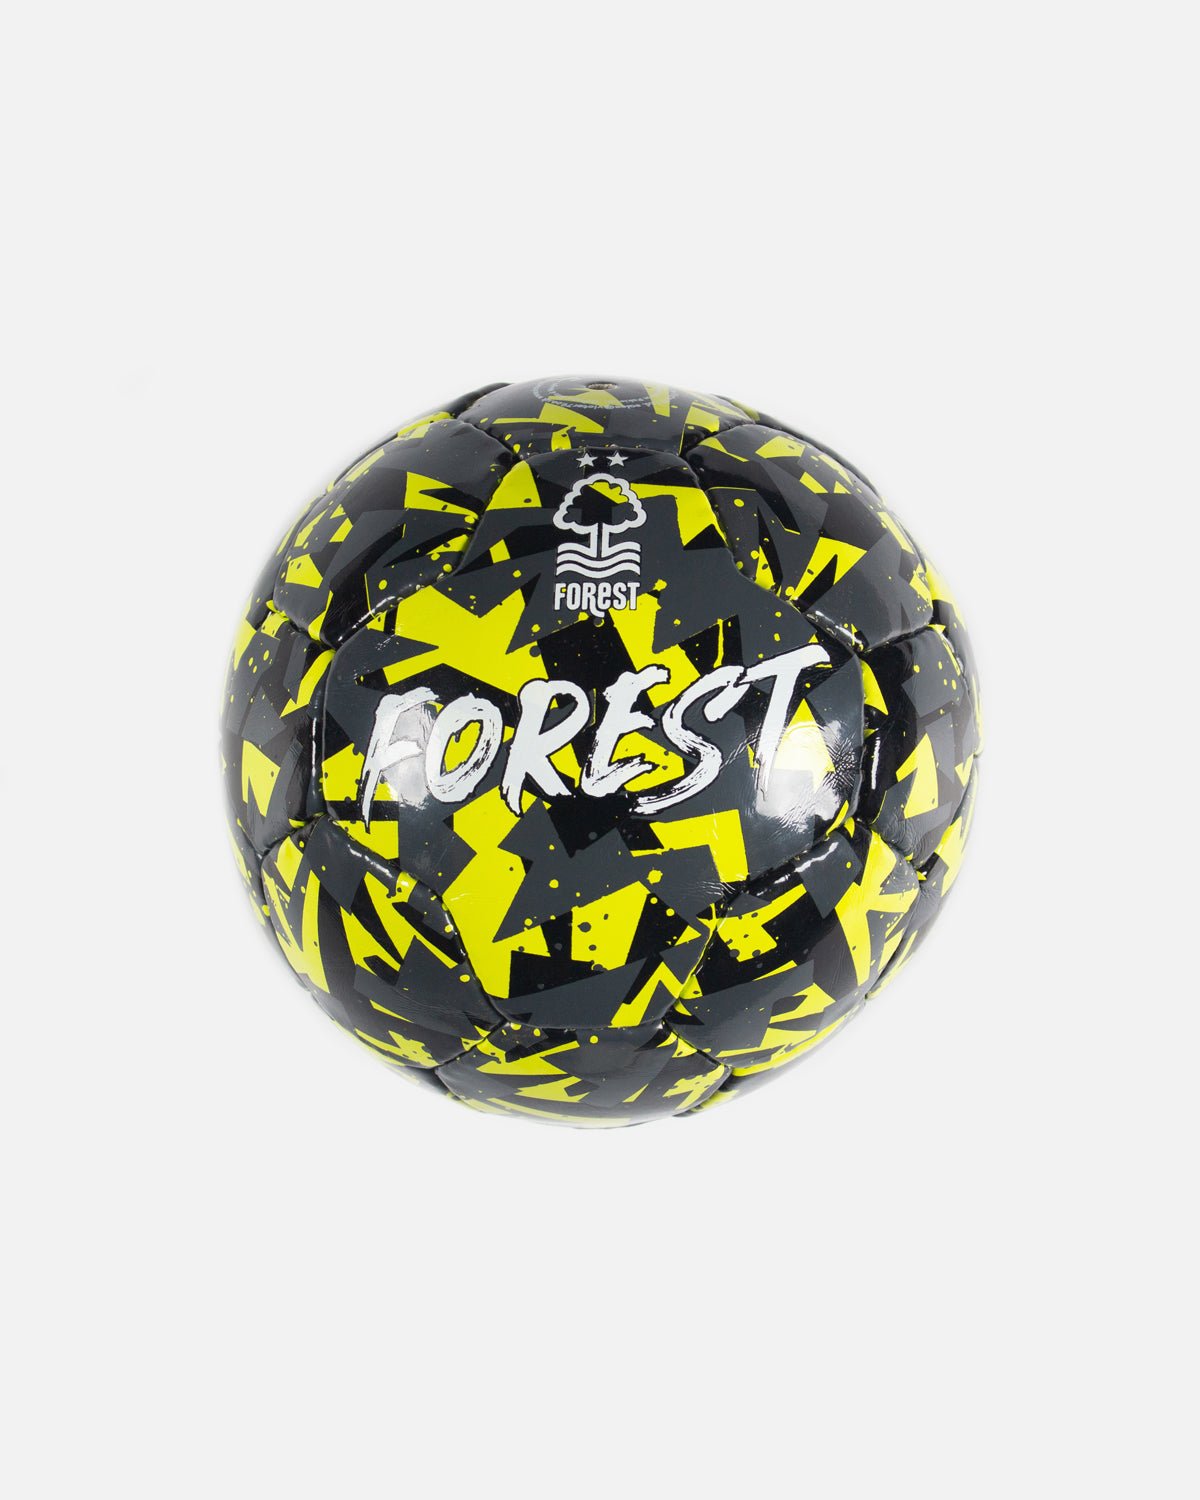 NFFC Neon Football Size 1 - Nottingham Forest FC